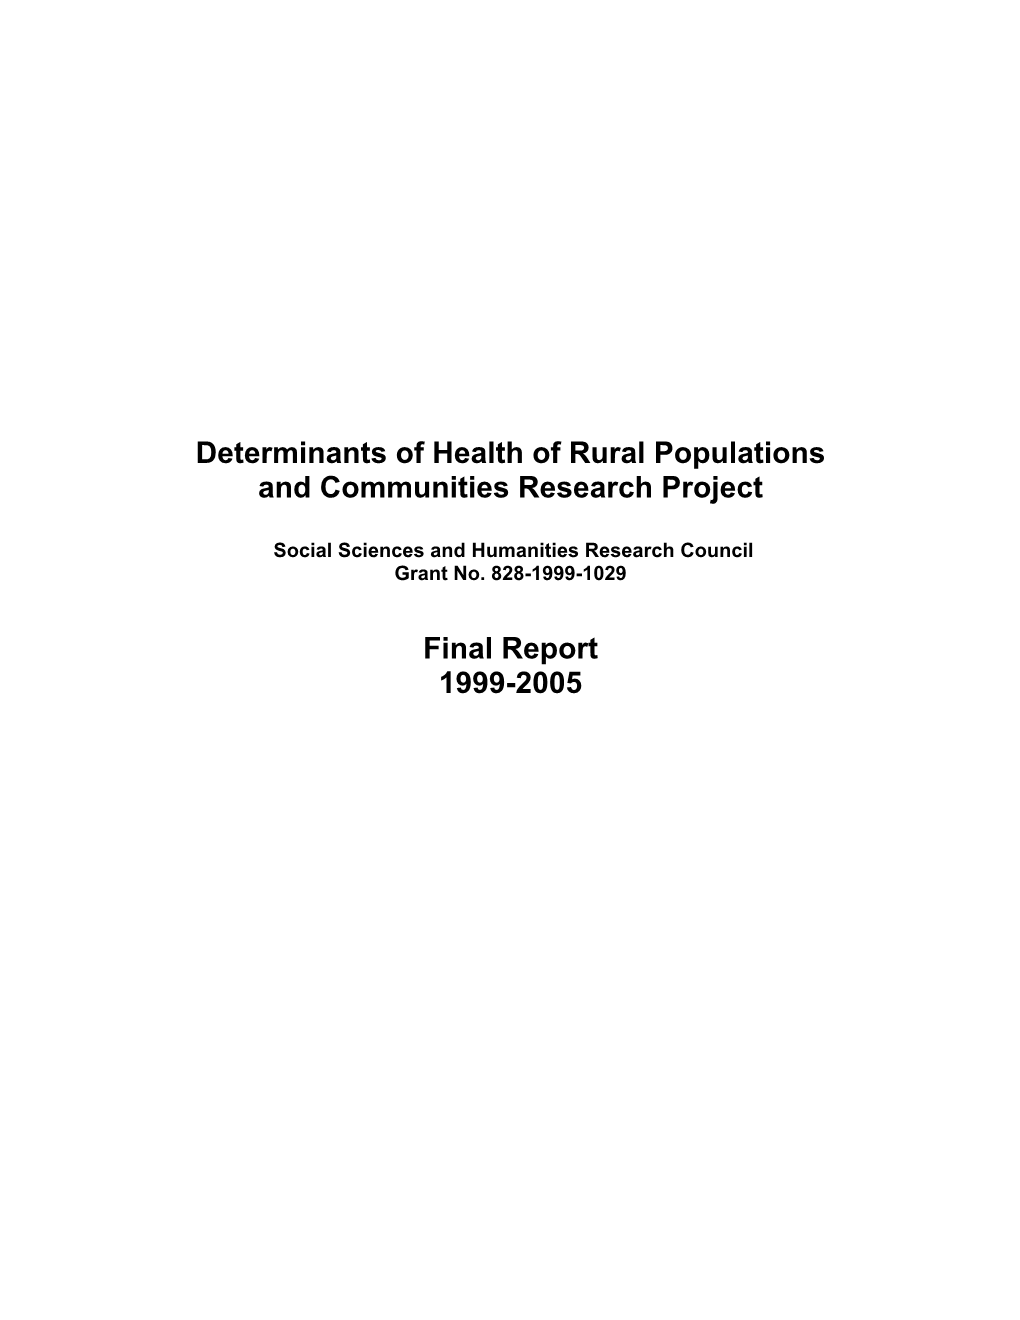 Determinants of Health of Rural Populations and Communities Research Project